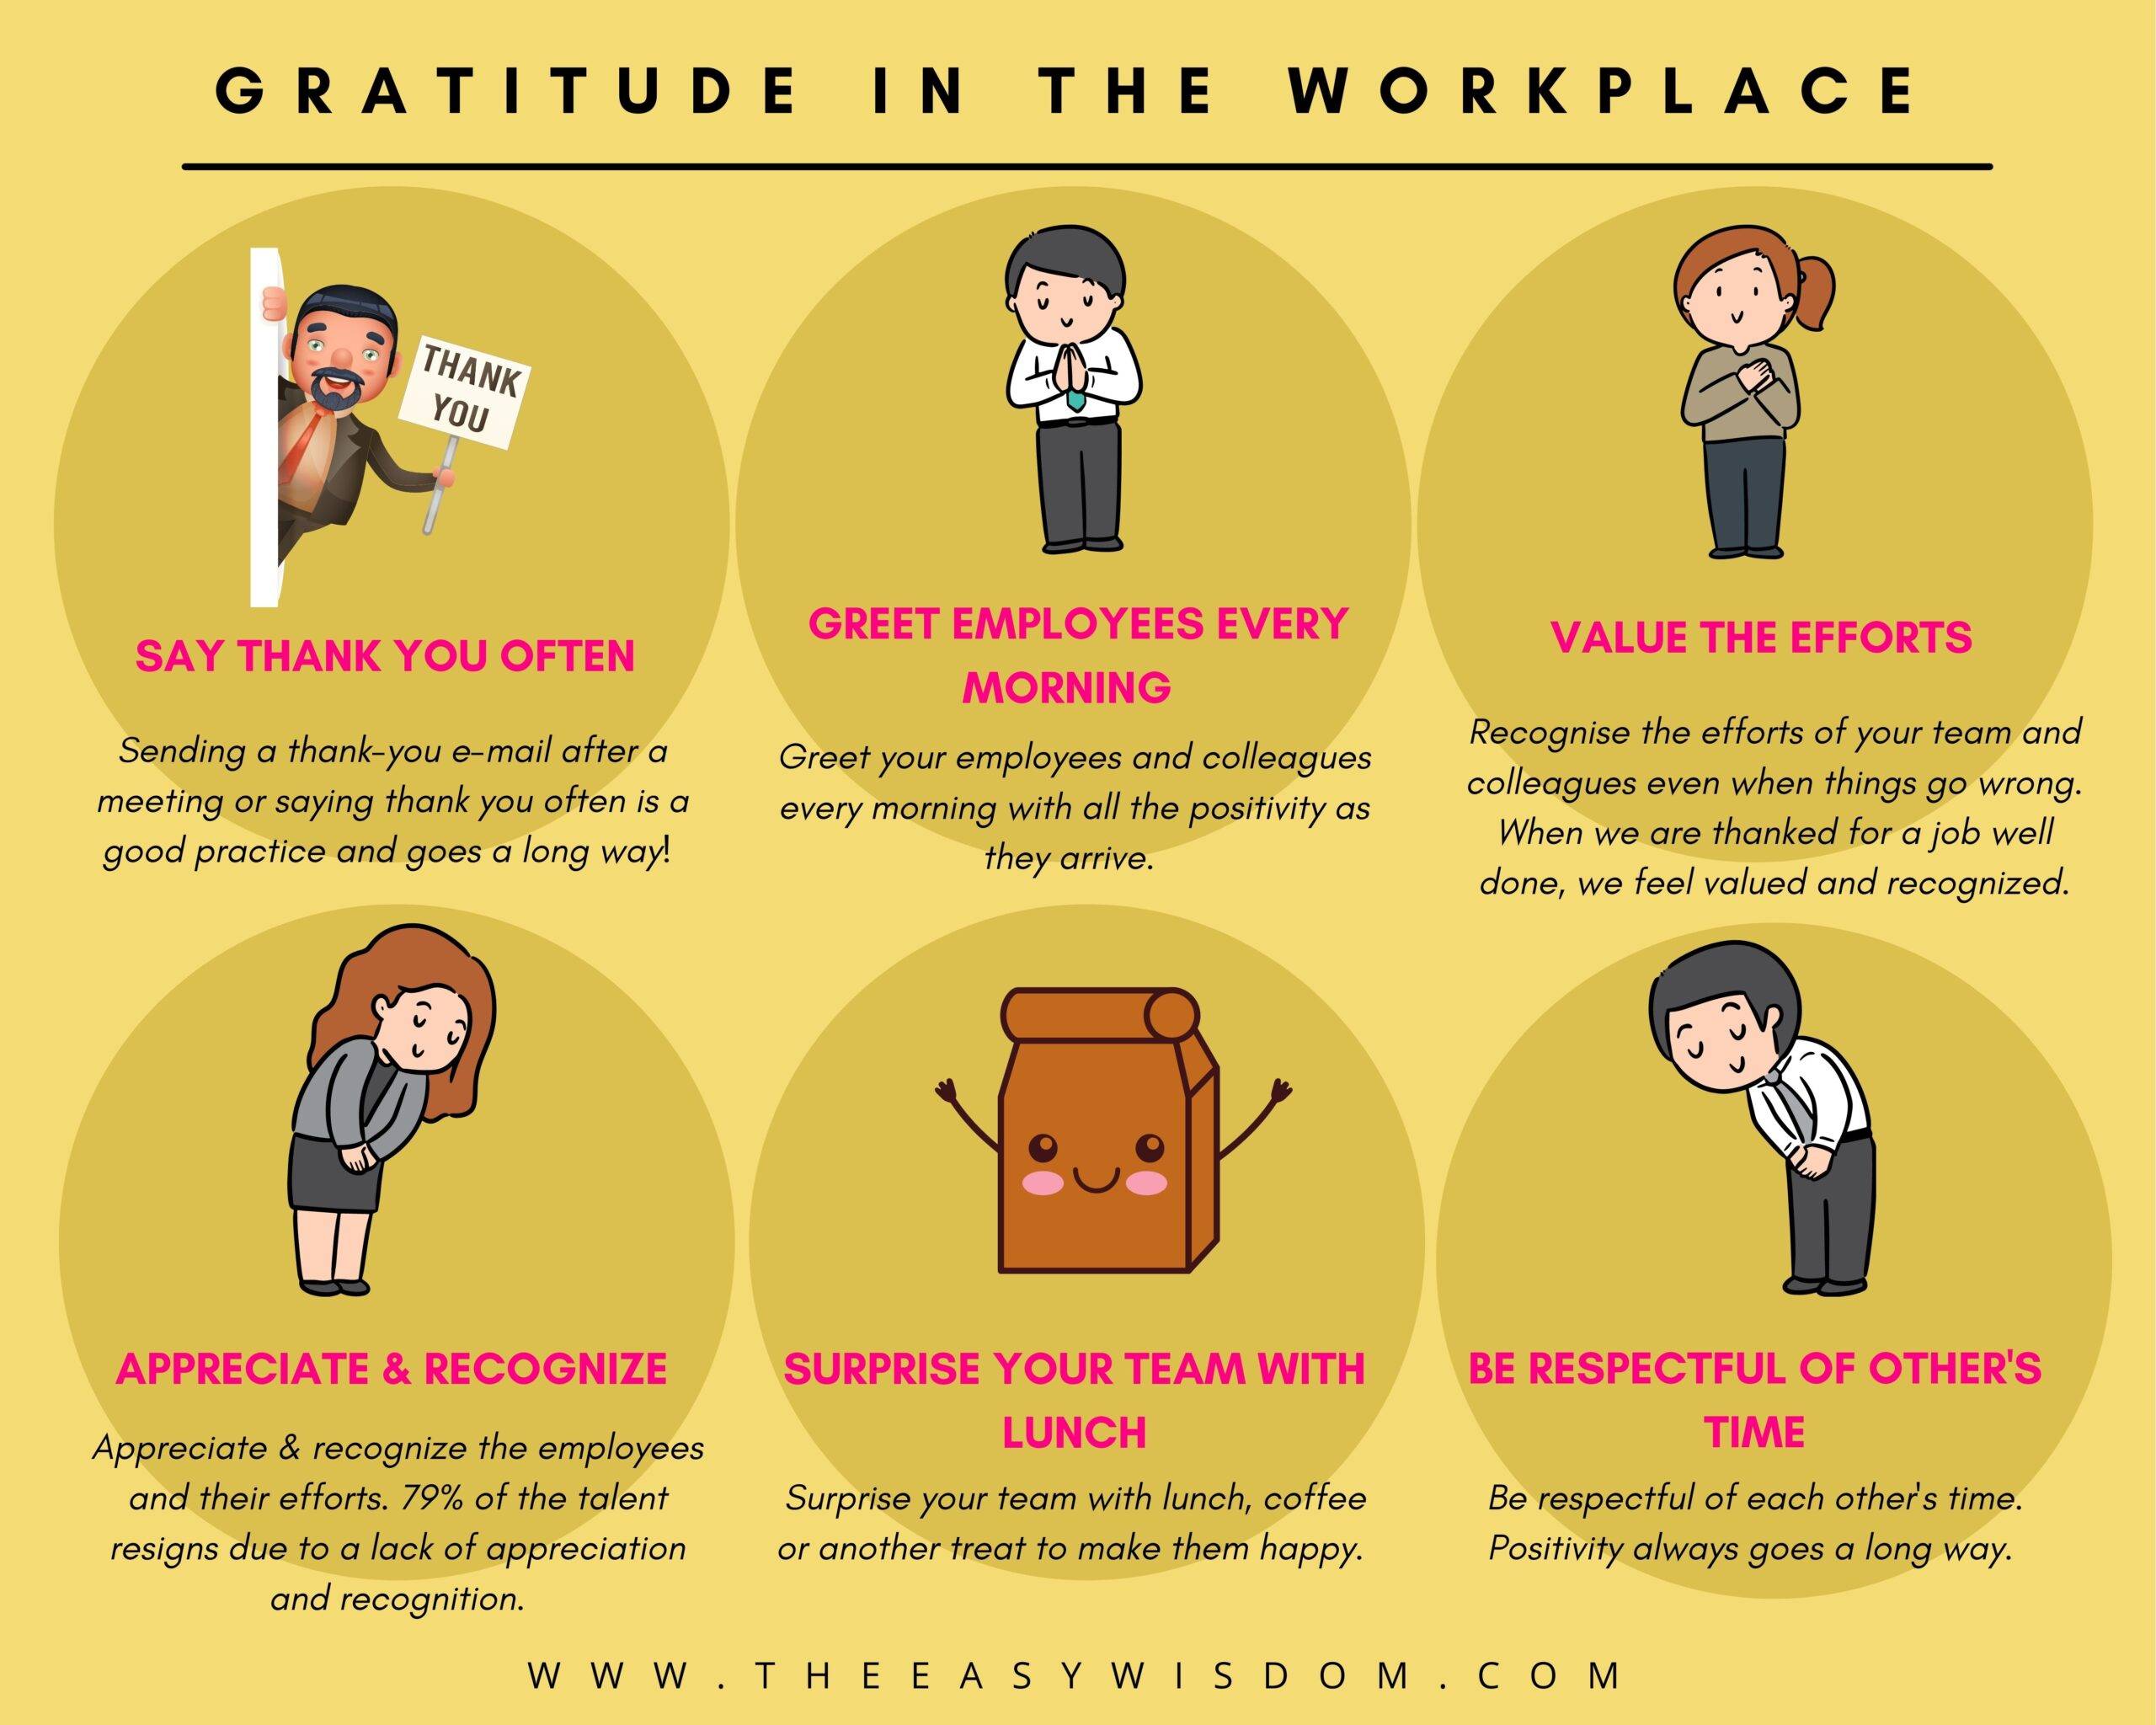 How to Practice Gratitude in the Workplace?